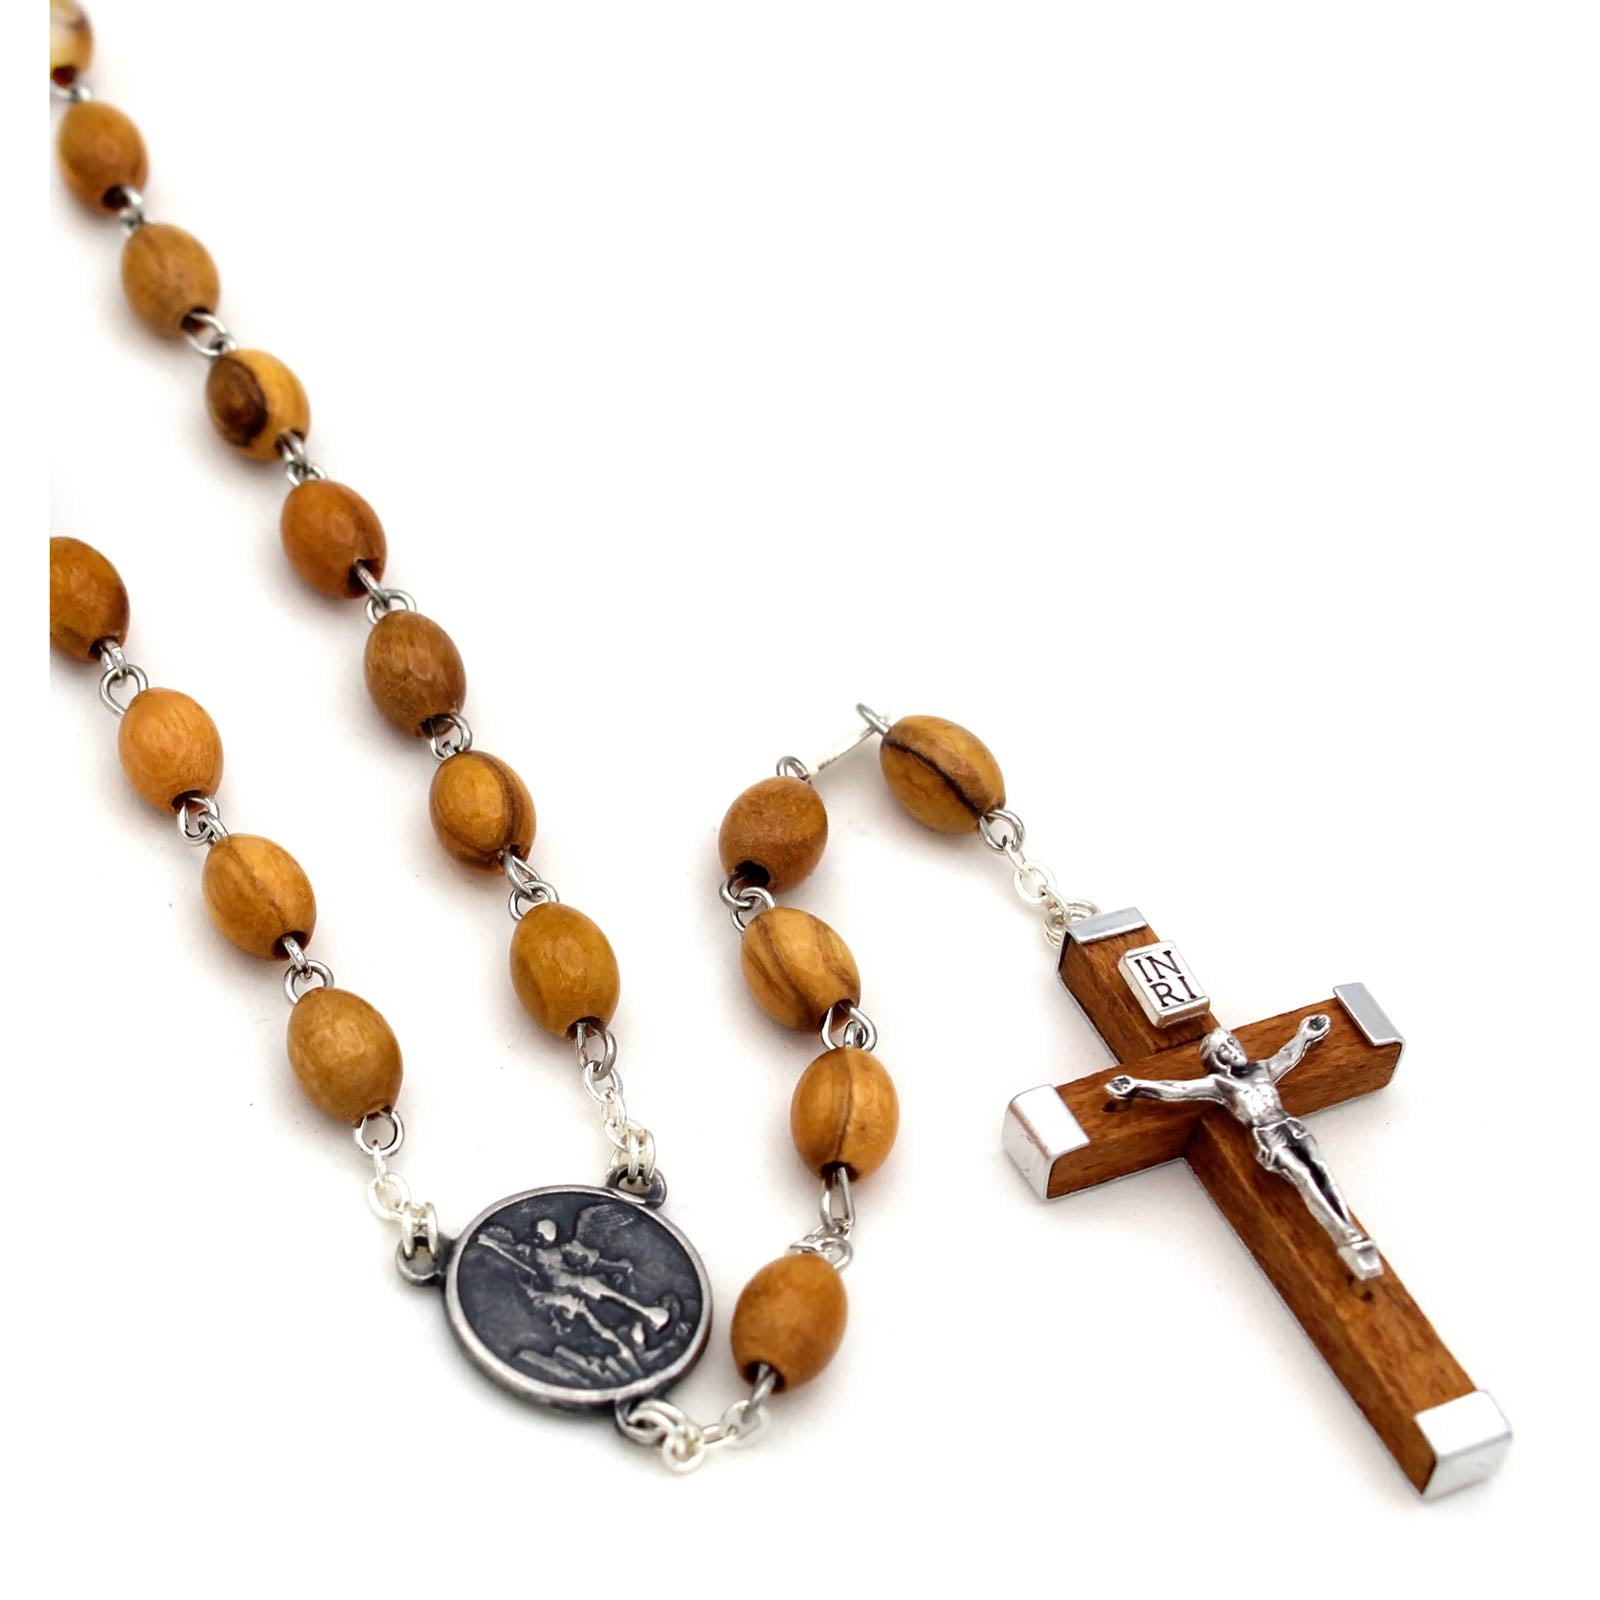 St. MIchael Rosary Olive Wood Beads Wooden Crucifix